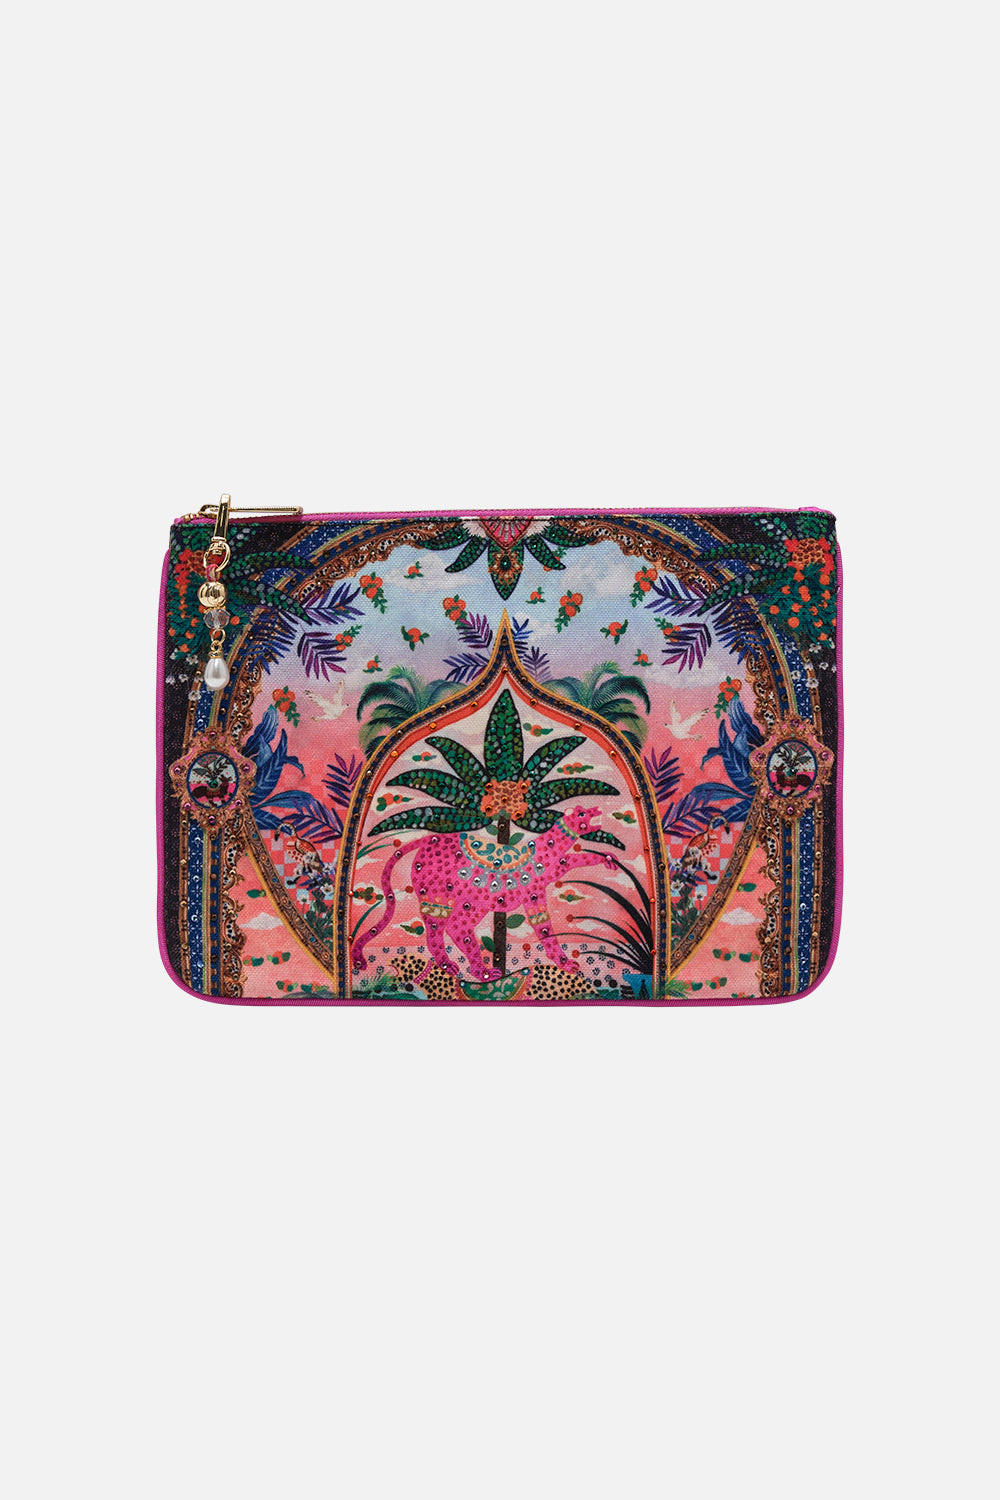 Product view of CAMILLA small clutch in Alessandro's Atlantis print